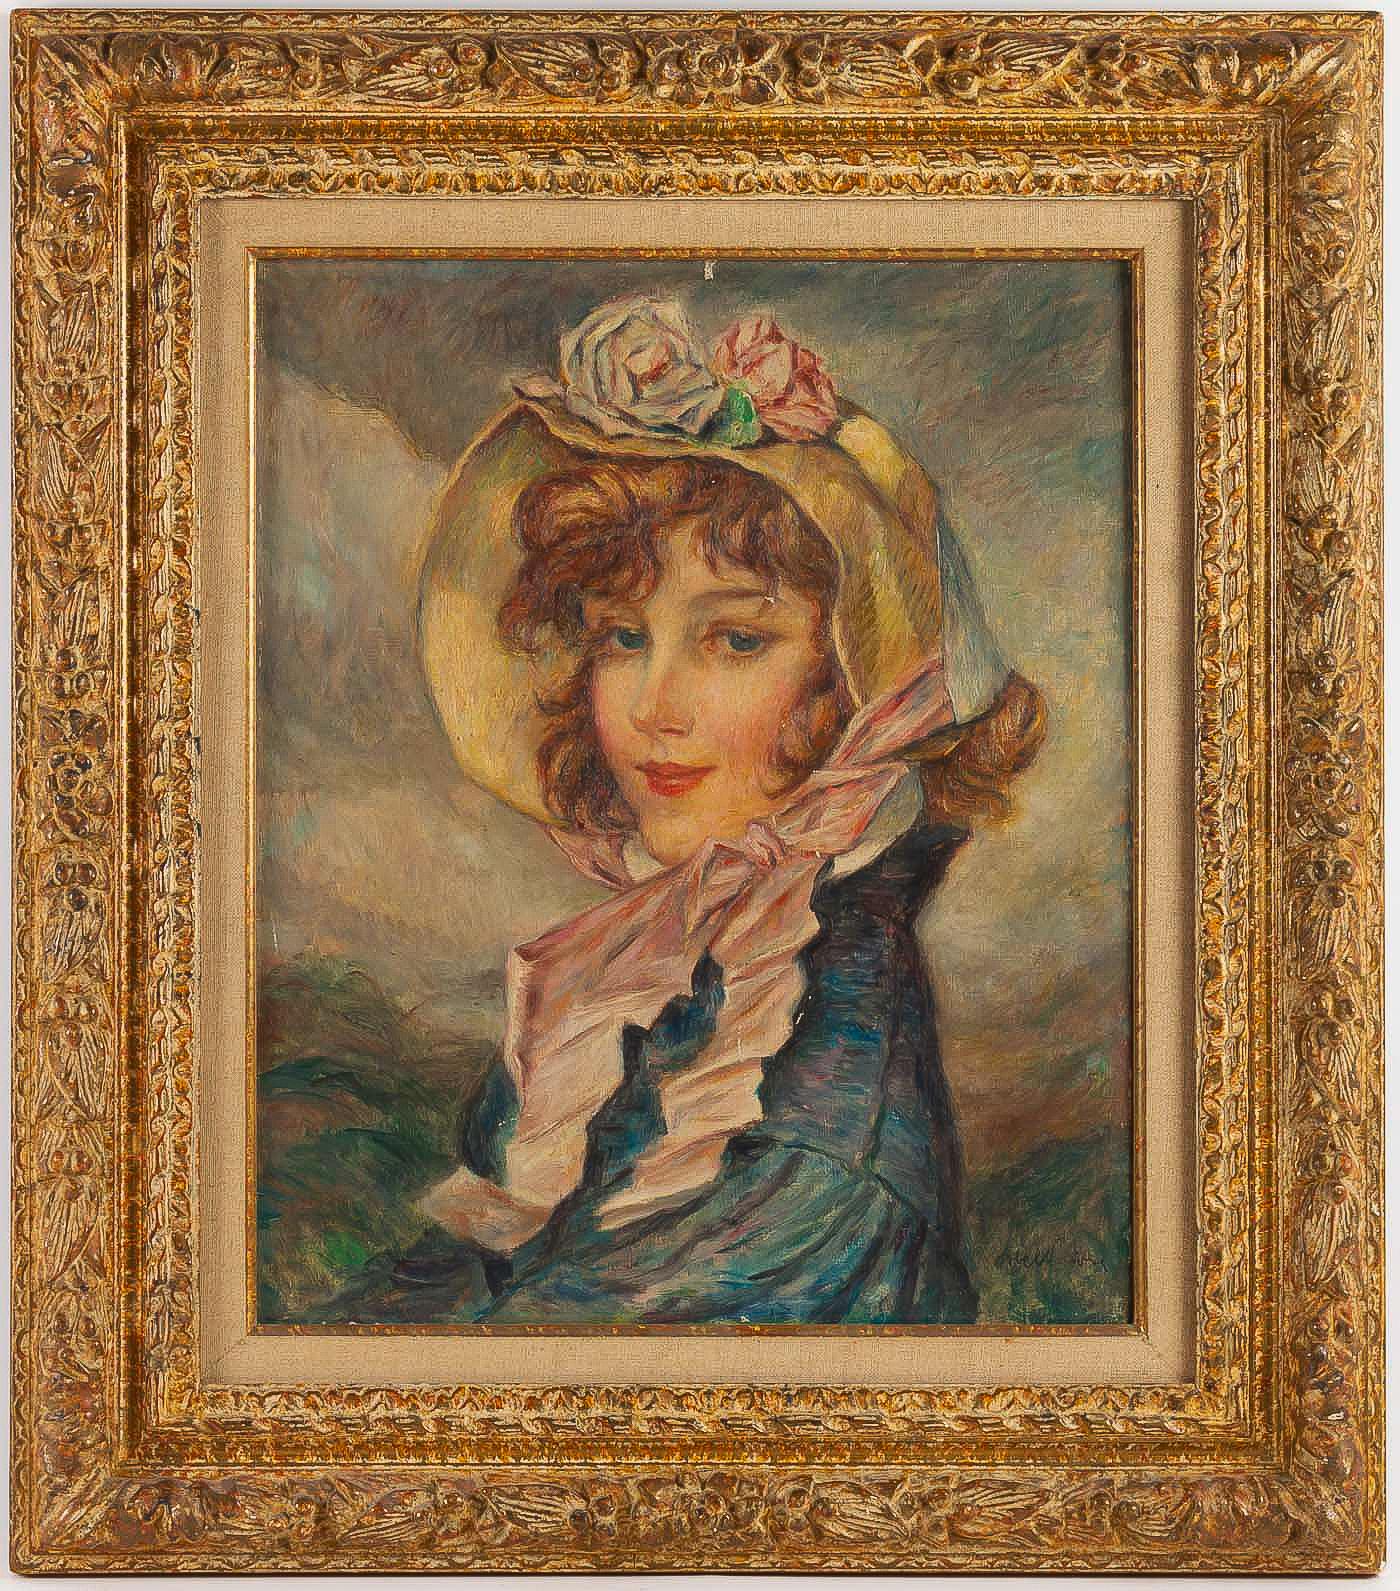 Jules Abel Faivre, oil on canvas « La Belle Rousse aux Yeux Bleus, circa 1895-1910.

Beautiful oil on canvas « La Belle Rousse aux Yeux Bleus » depicting a beautiful young redheaded woman with blue eyes wearing a hat, a lot of quality in this